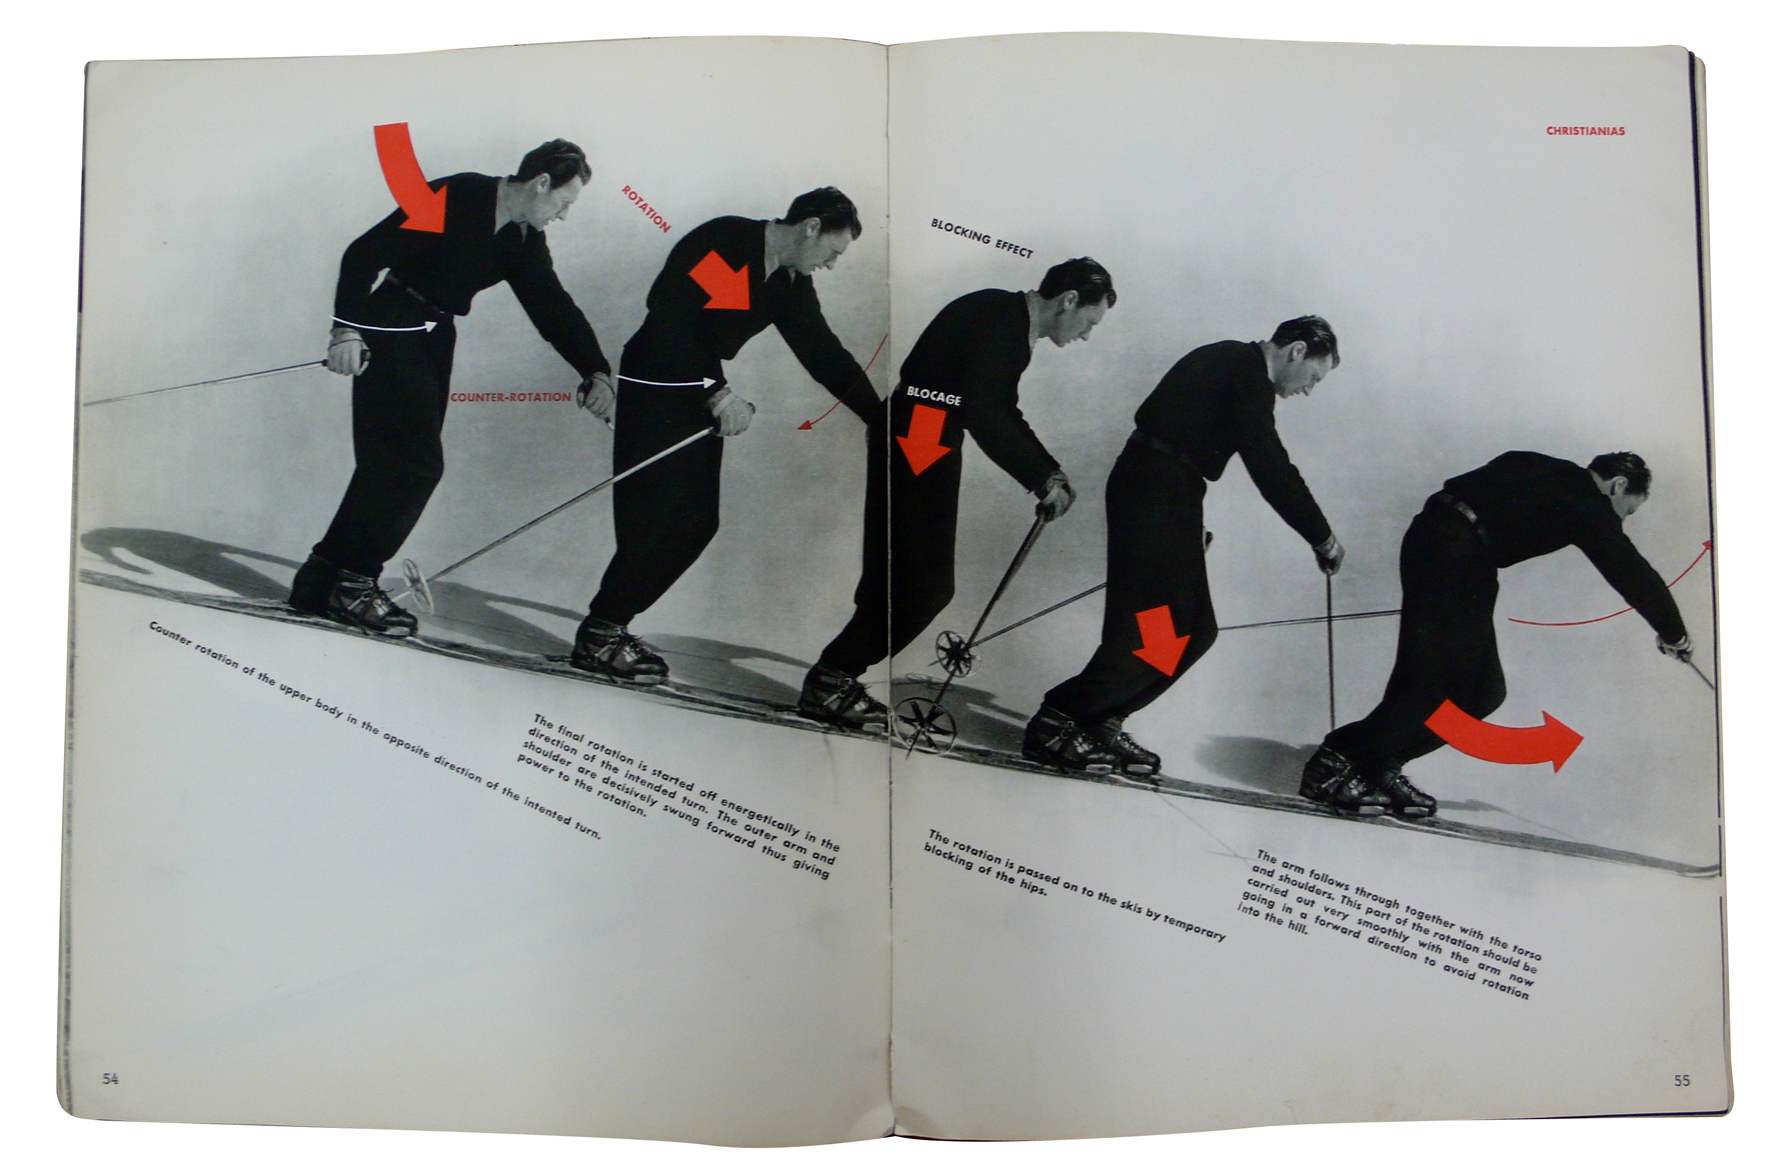 How To Ski Publication Design pertaining to how to ski book with regard to Inspire